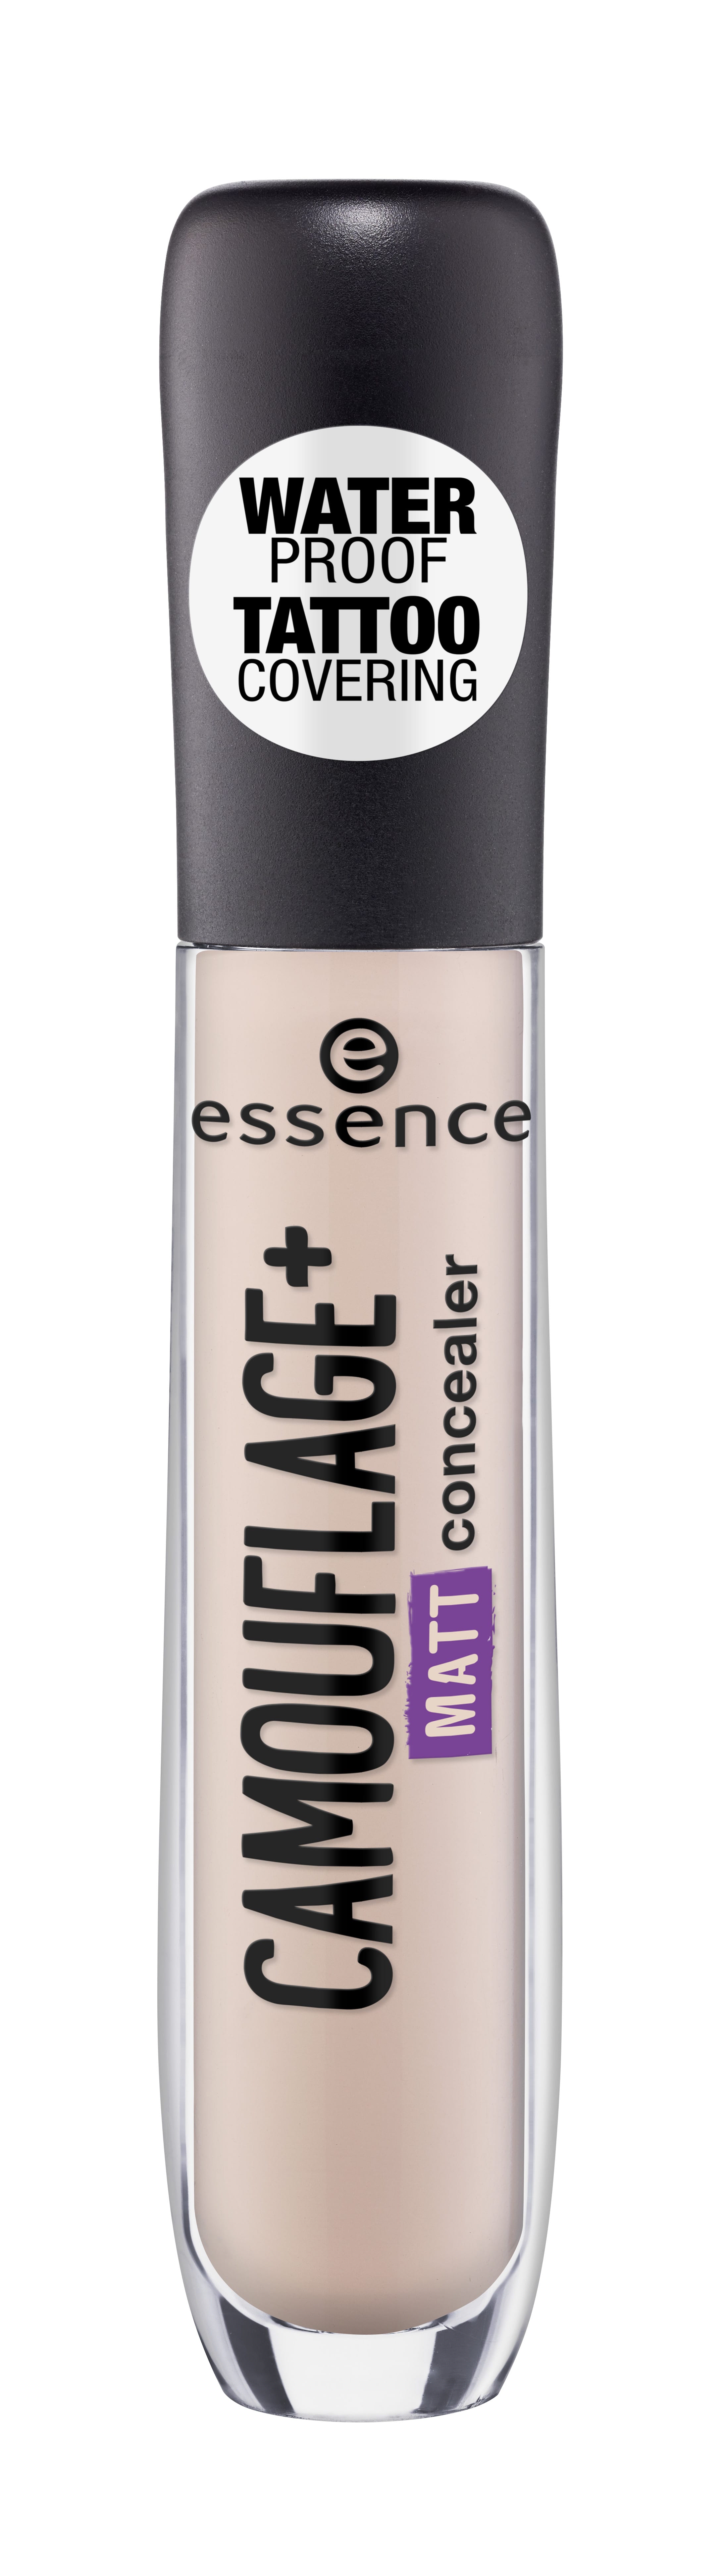 essence-camouflage-matt-concealer-10_image_front-view-closed-e3-50